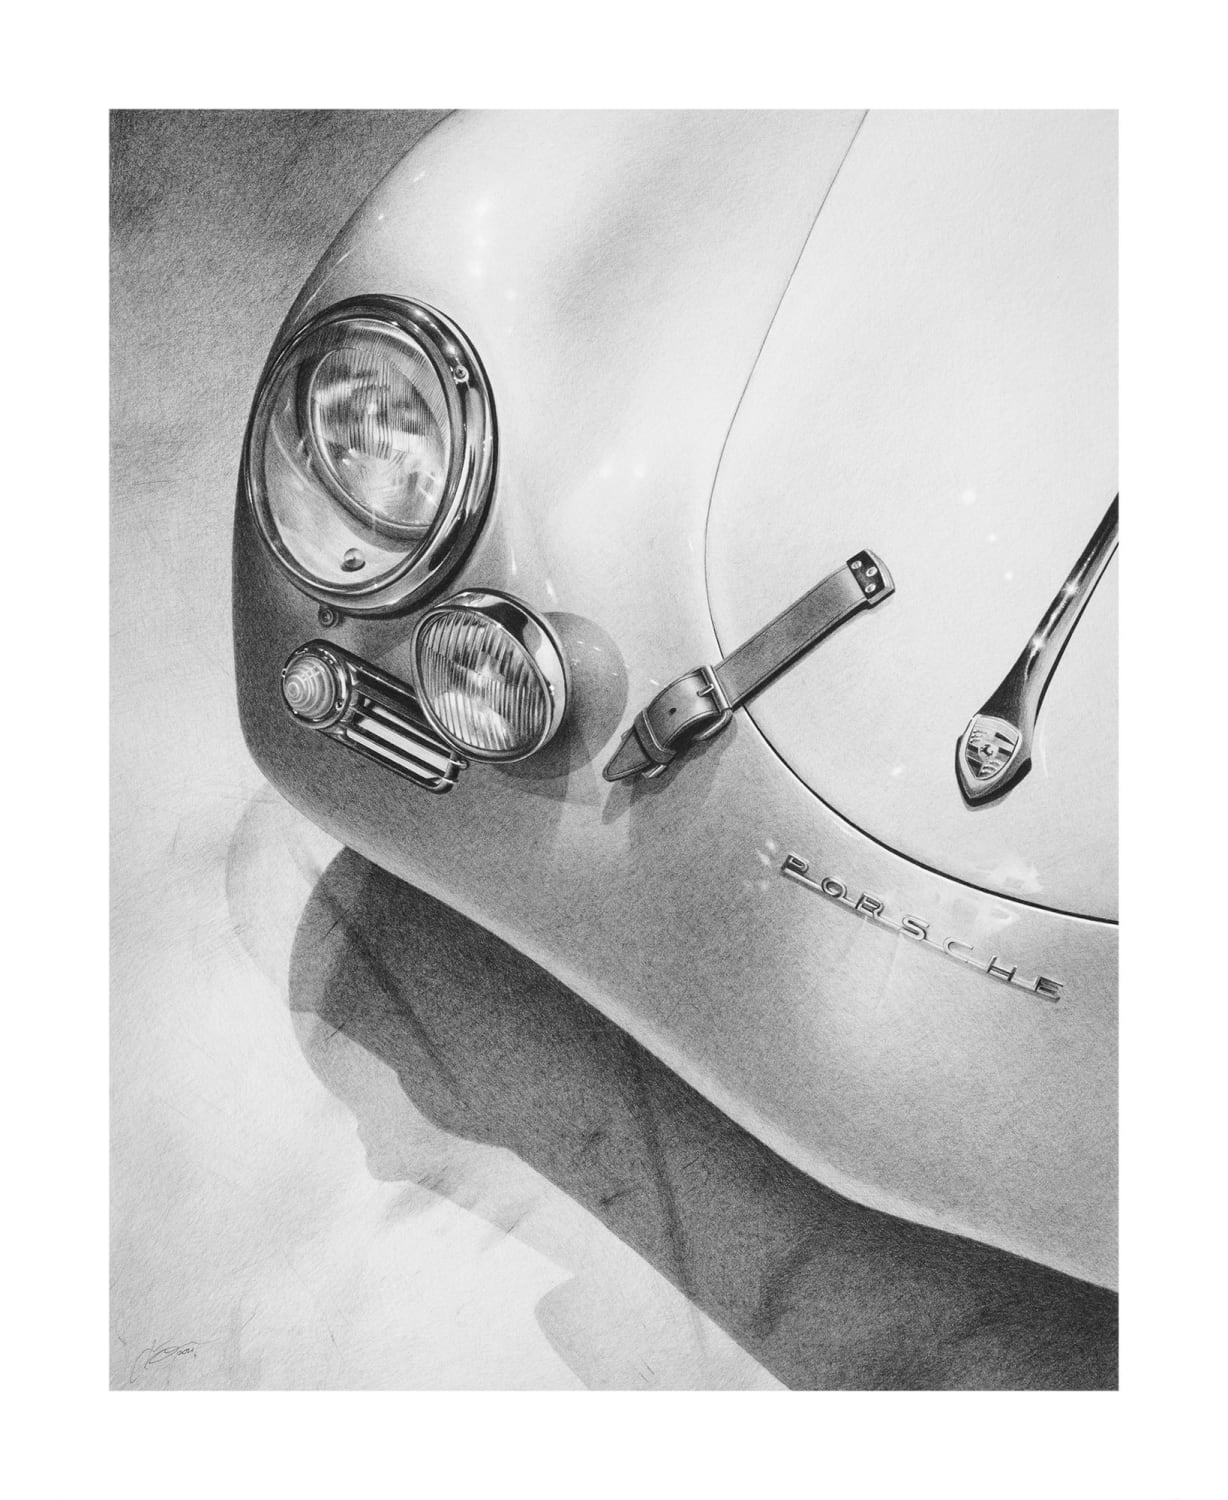 I love drawing old cars, here's Porsche 356 I did in graphite :)